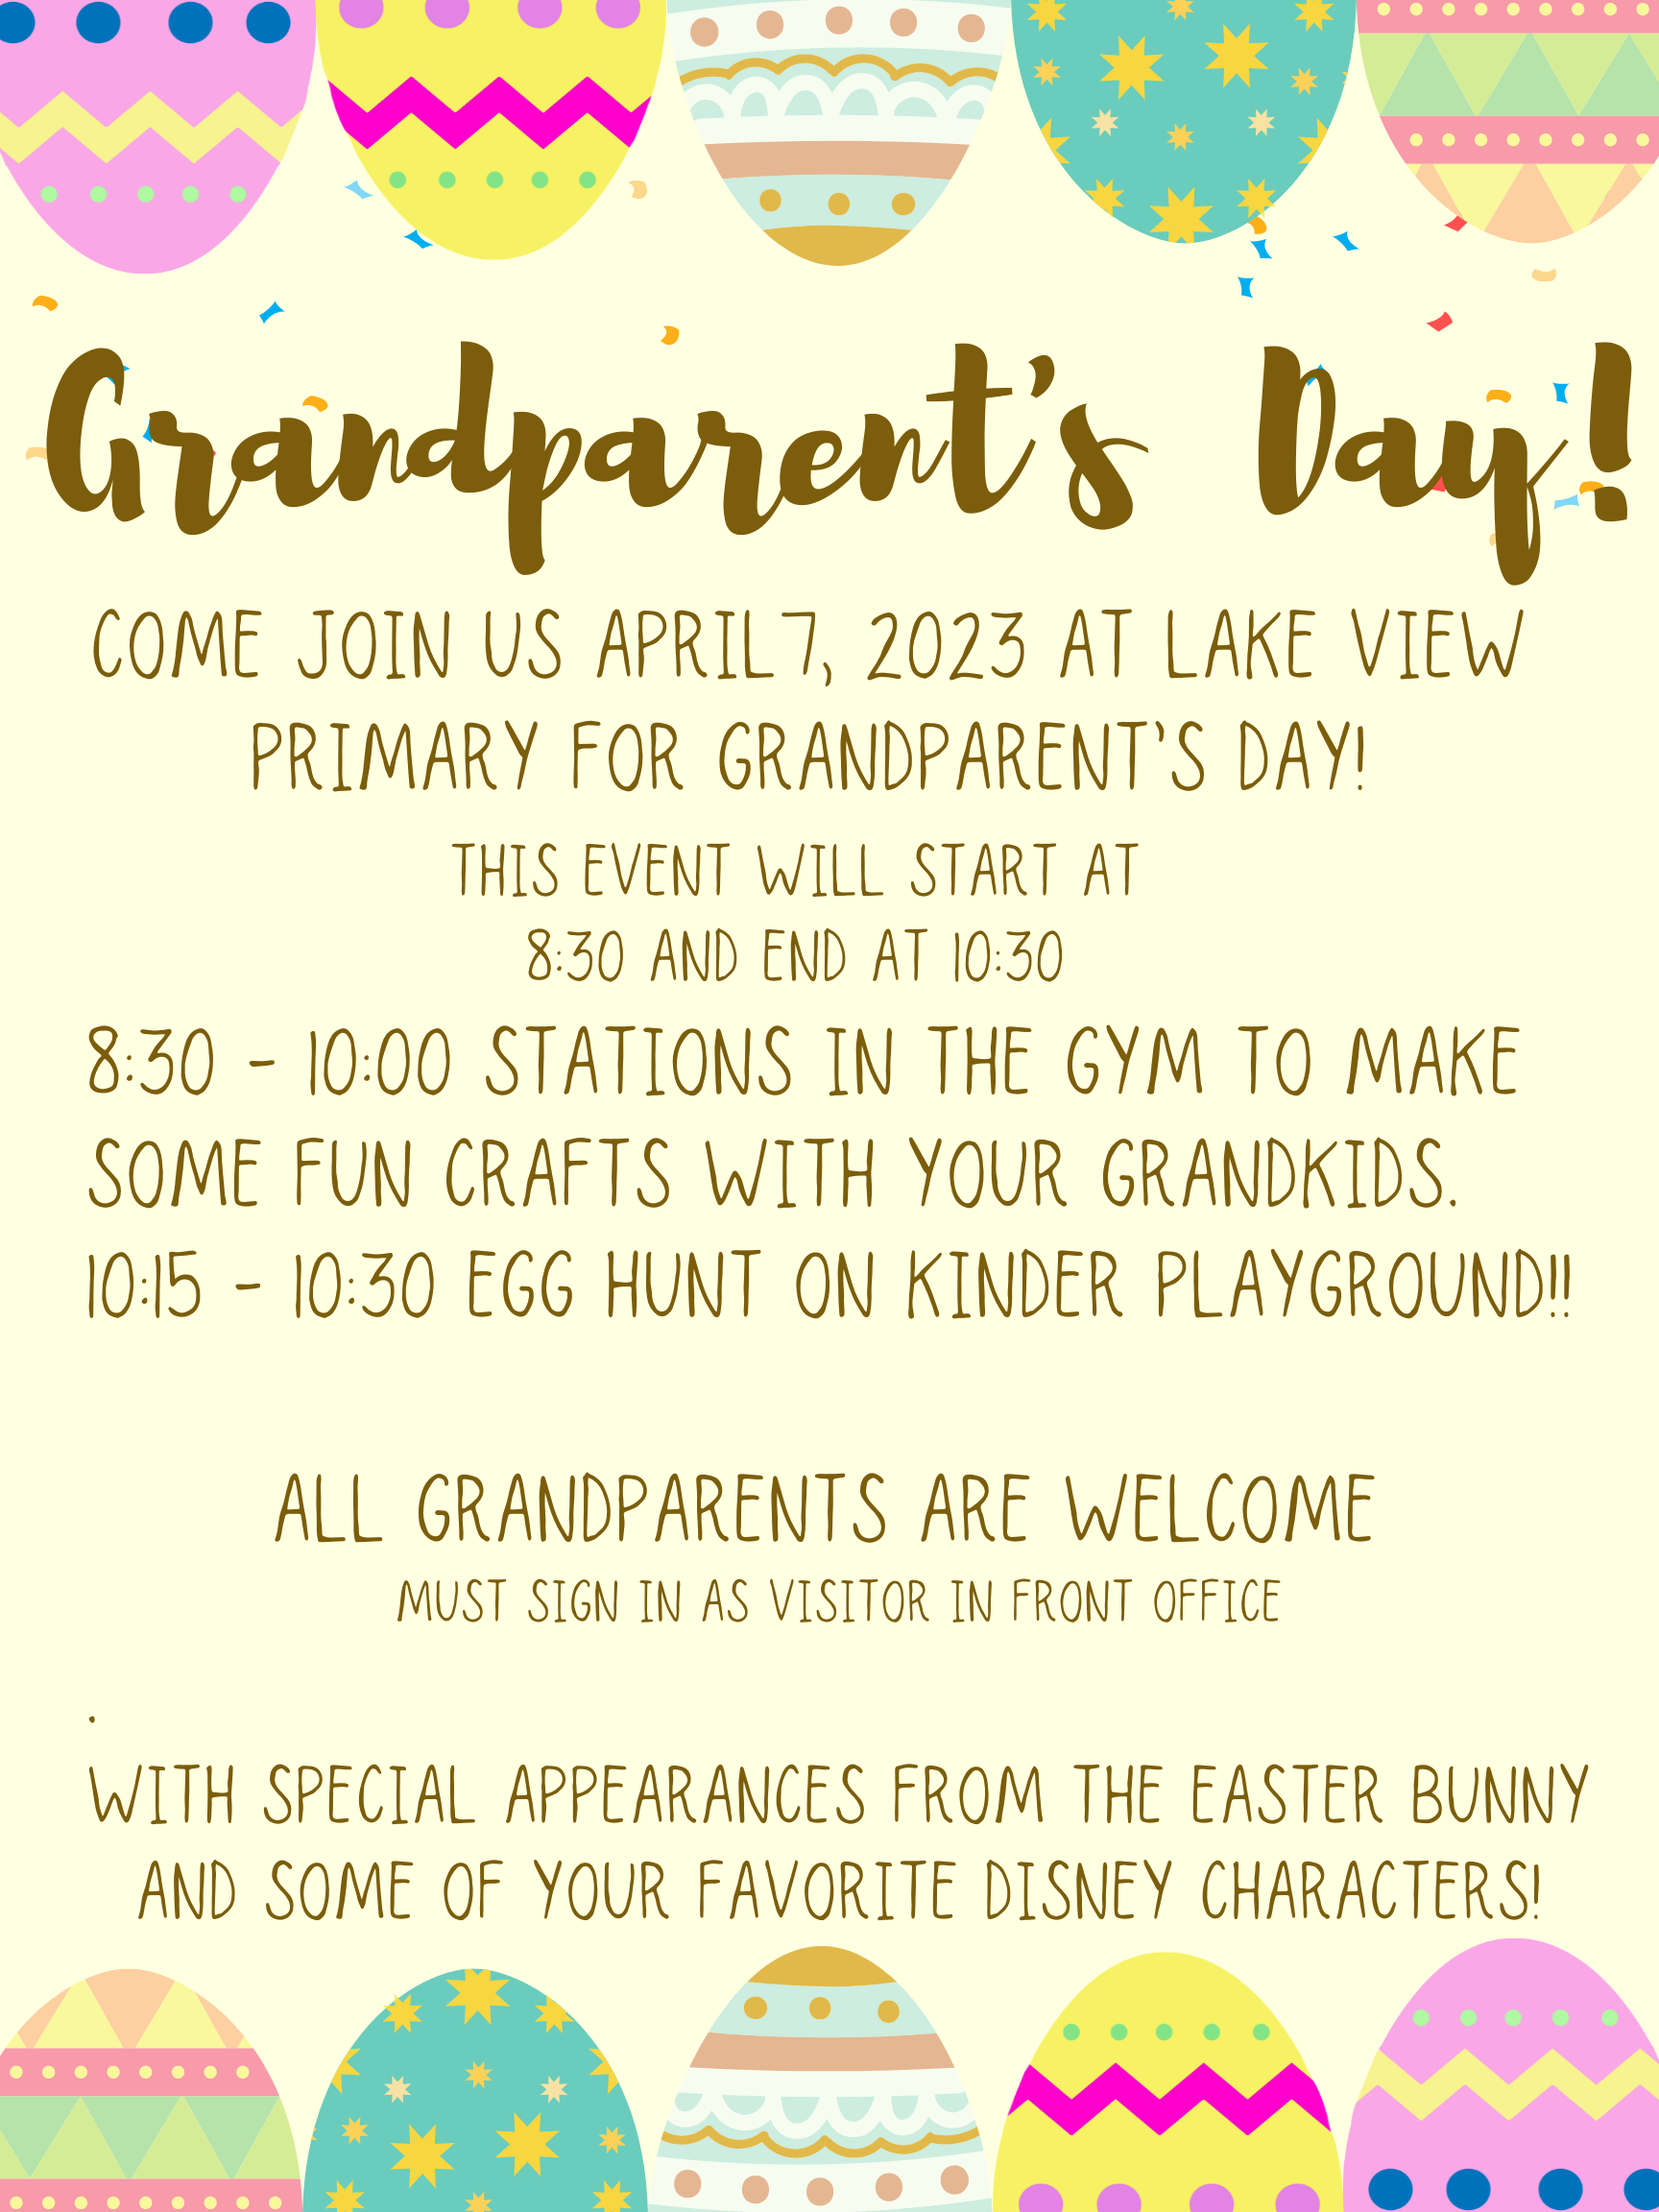 Reminder of upcoming Grandparent's Day